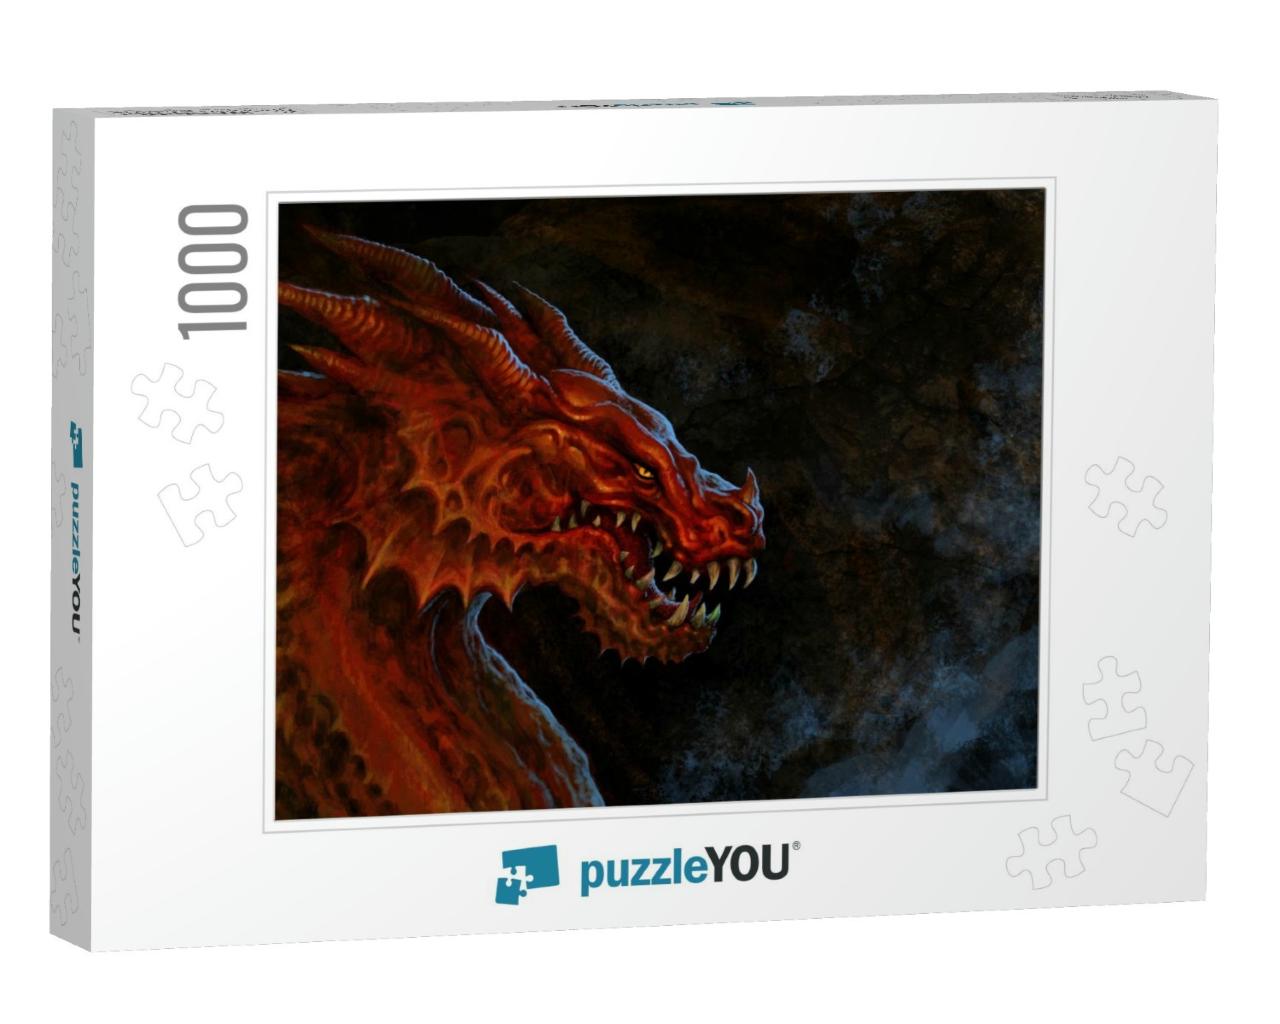 Fantasy Red Dragon Head - Digital Illustration... Jigsaw Puzzle with 1000 pieces